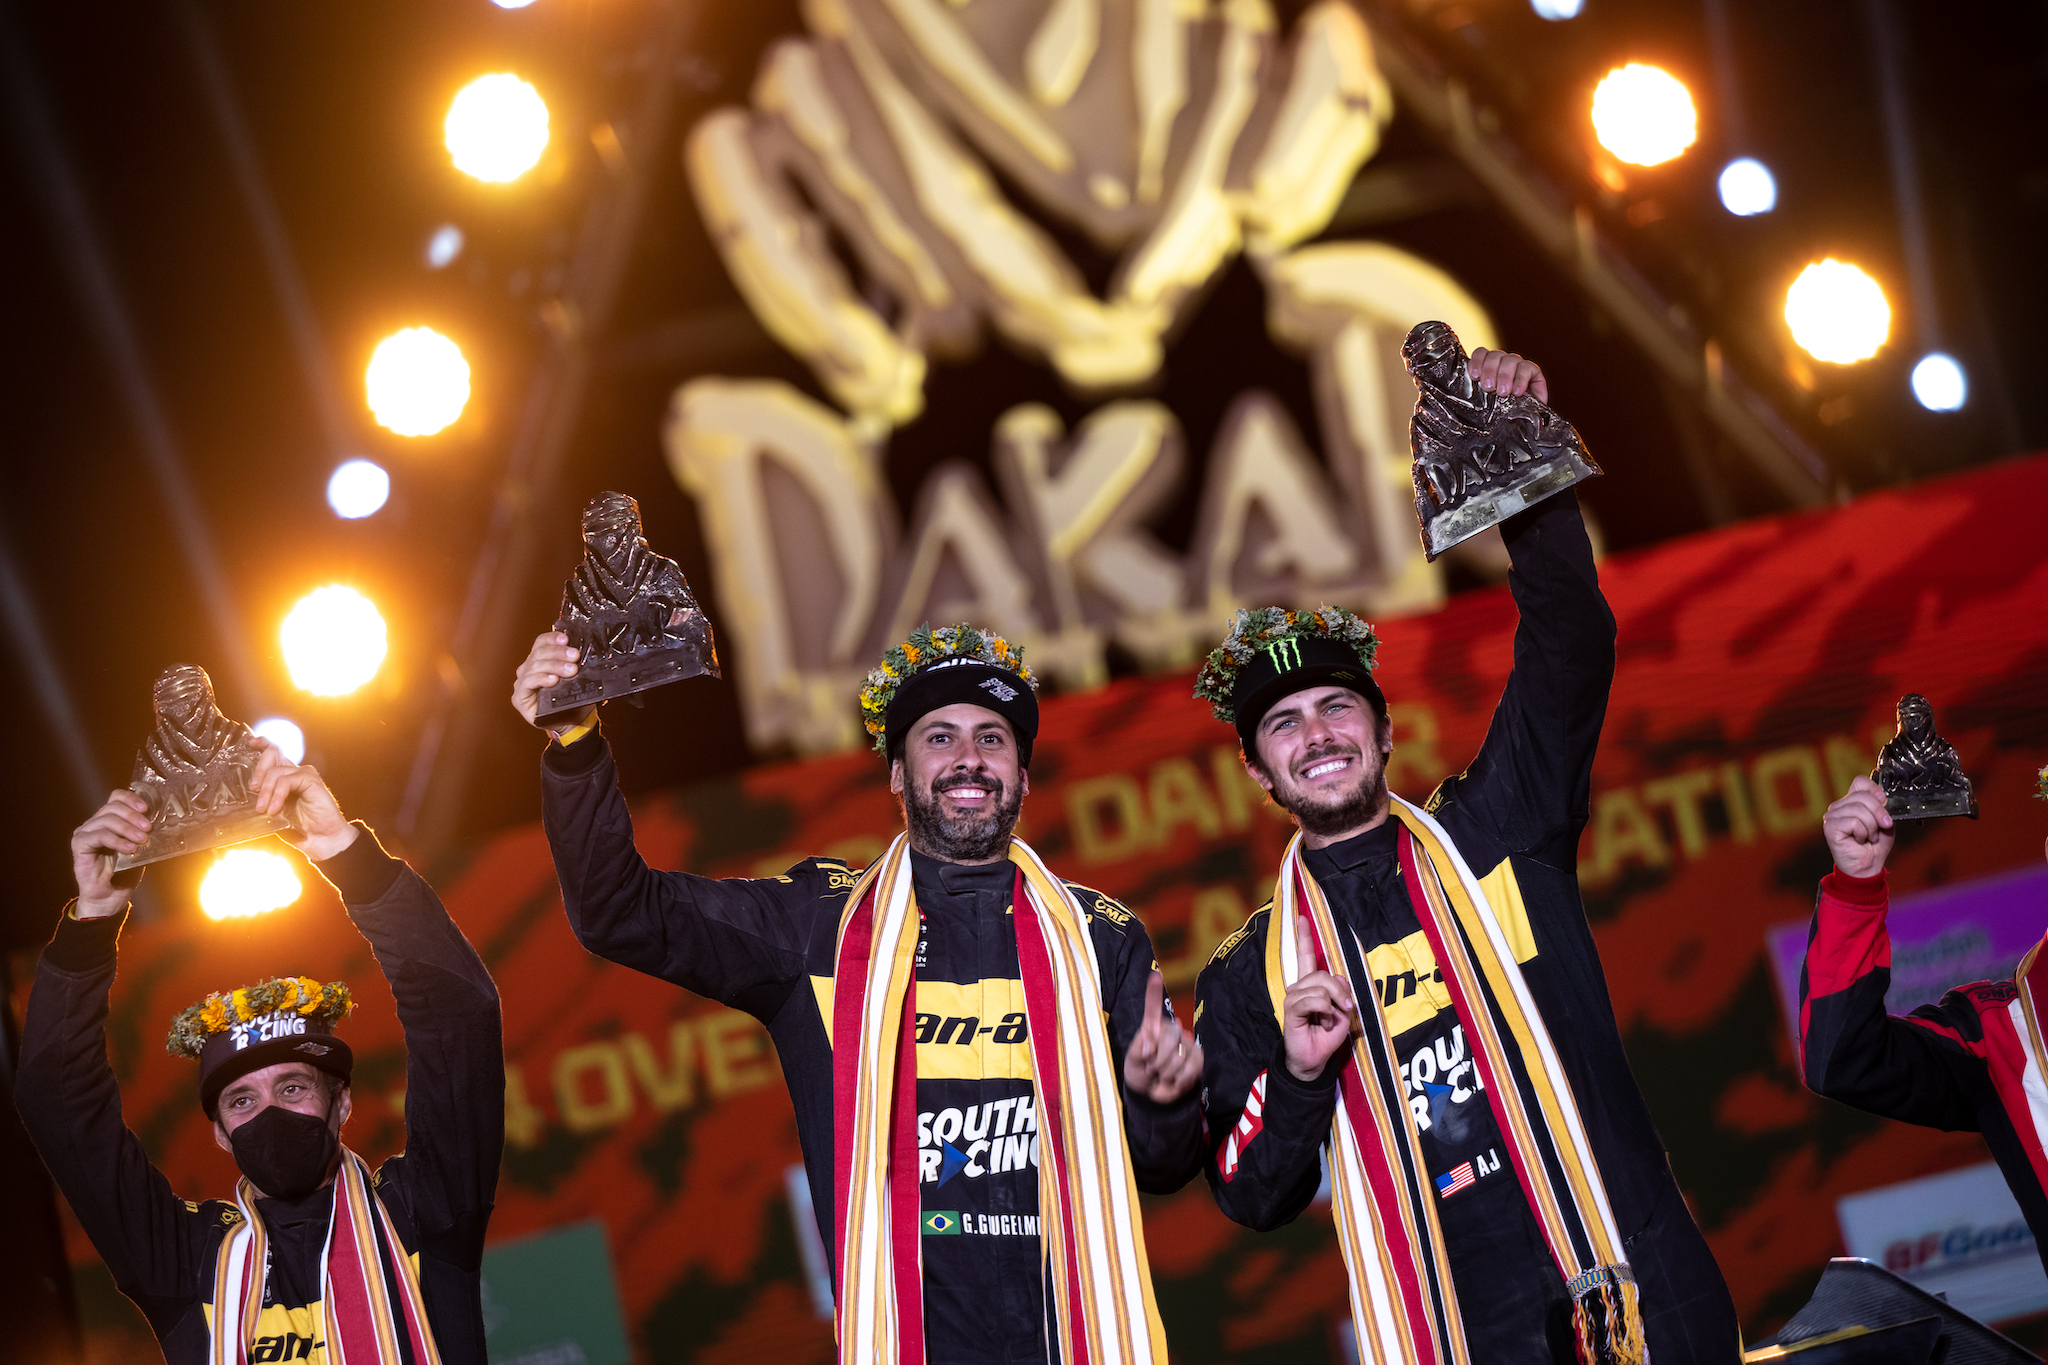 CAN-AM OFF-ROAD TAKES HOME THE DAKAR RALLY CHAMPIONSHIP FOR THE FIFTH CONSECUTIVE YEAR!